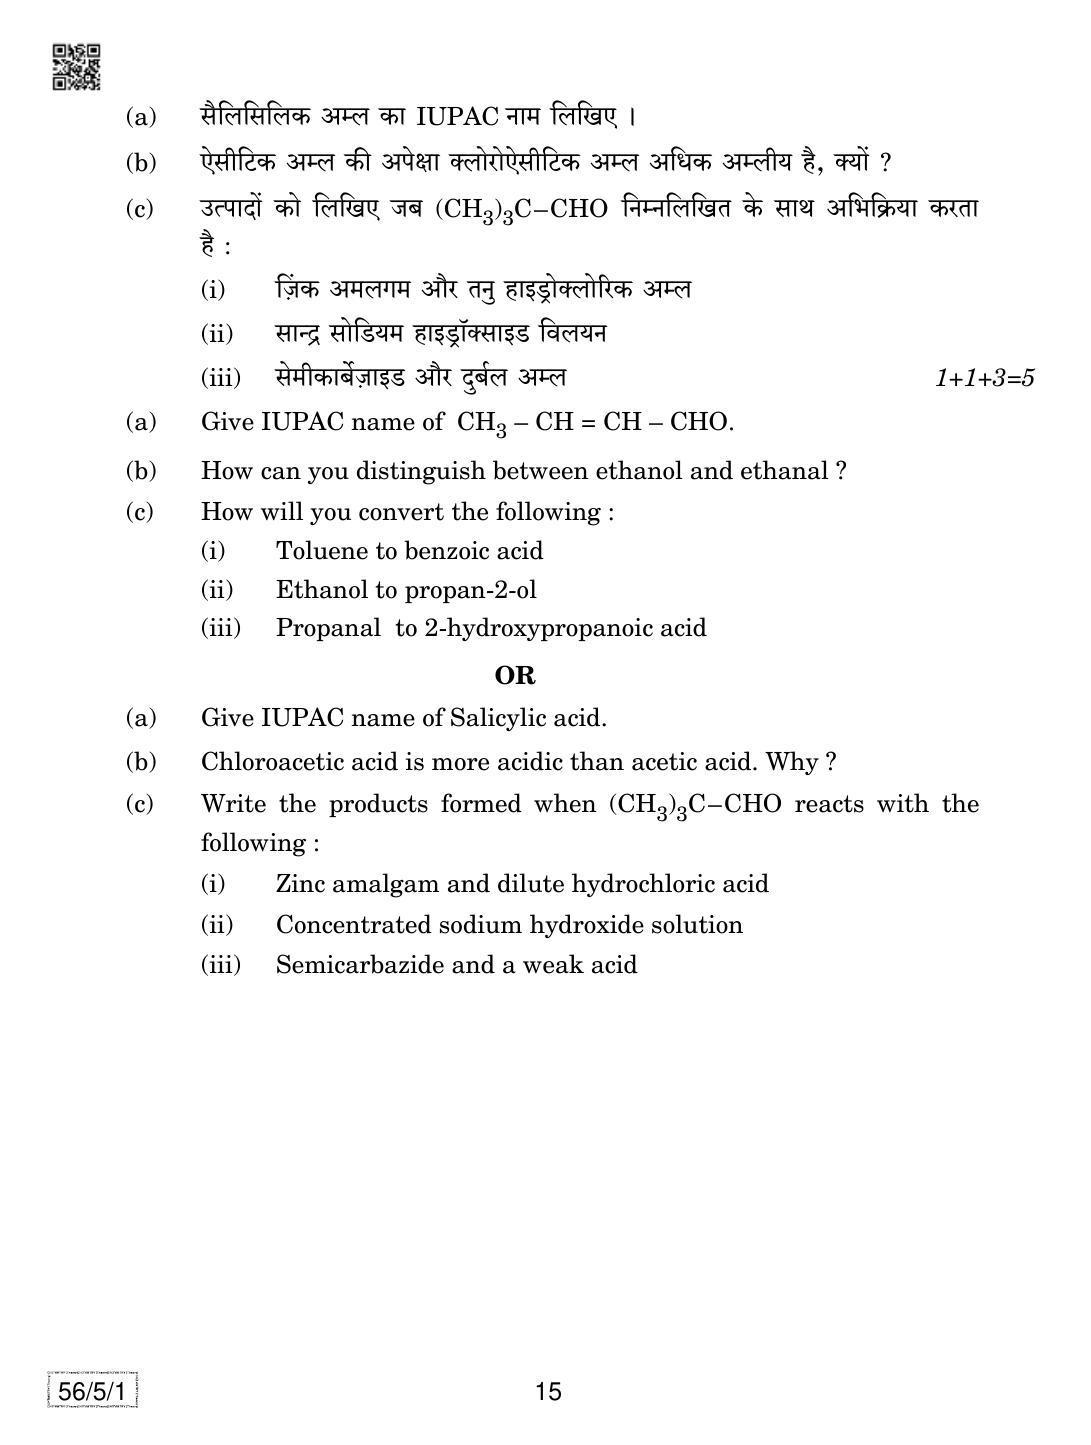 CBSE Class 12 56-5-1 Chemistry 2019 Question Paper - Page 15